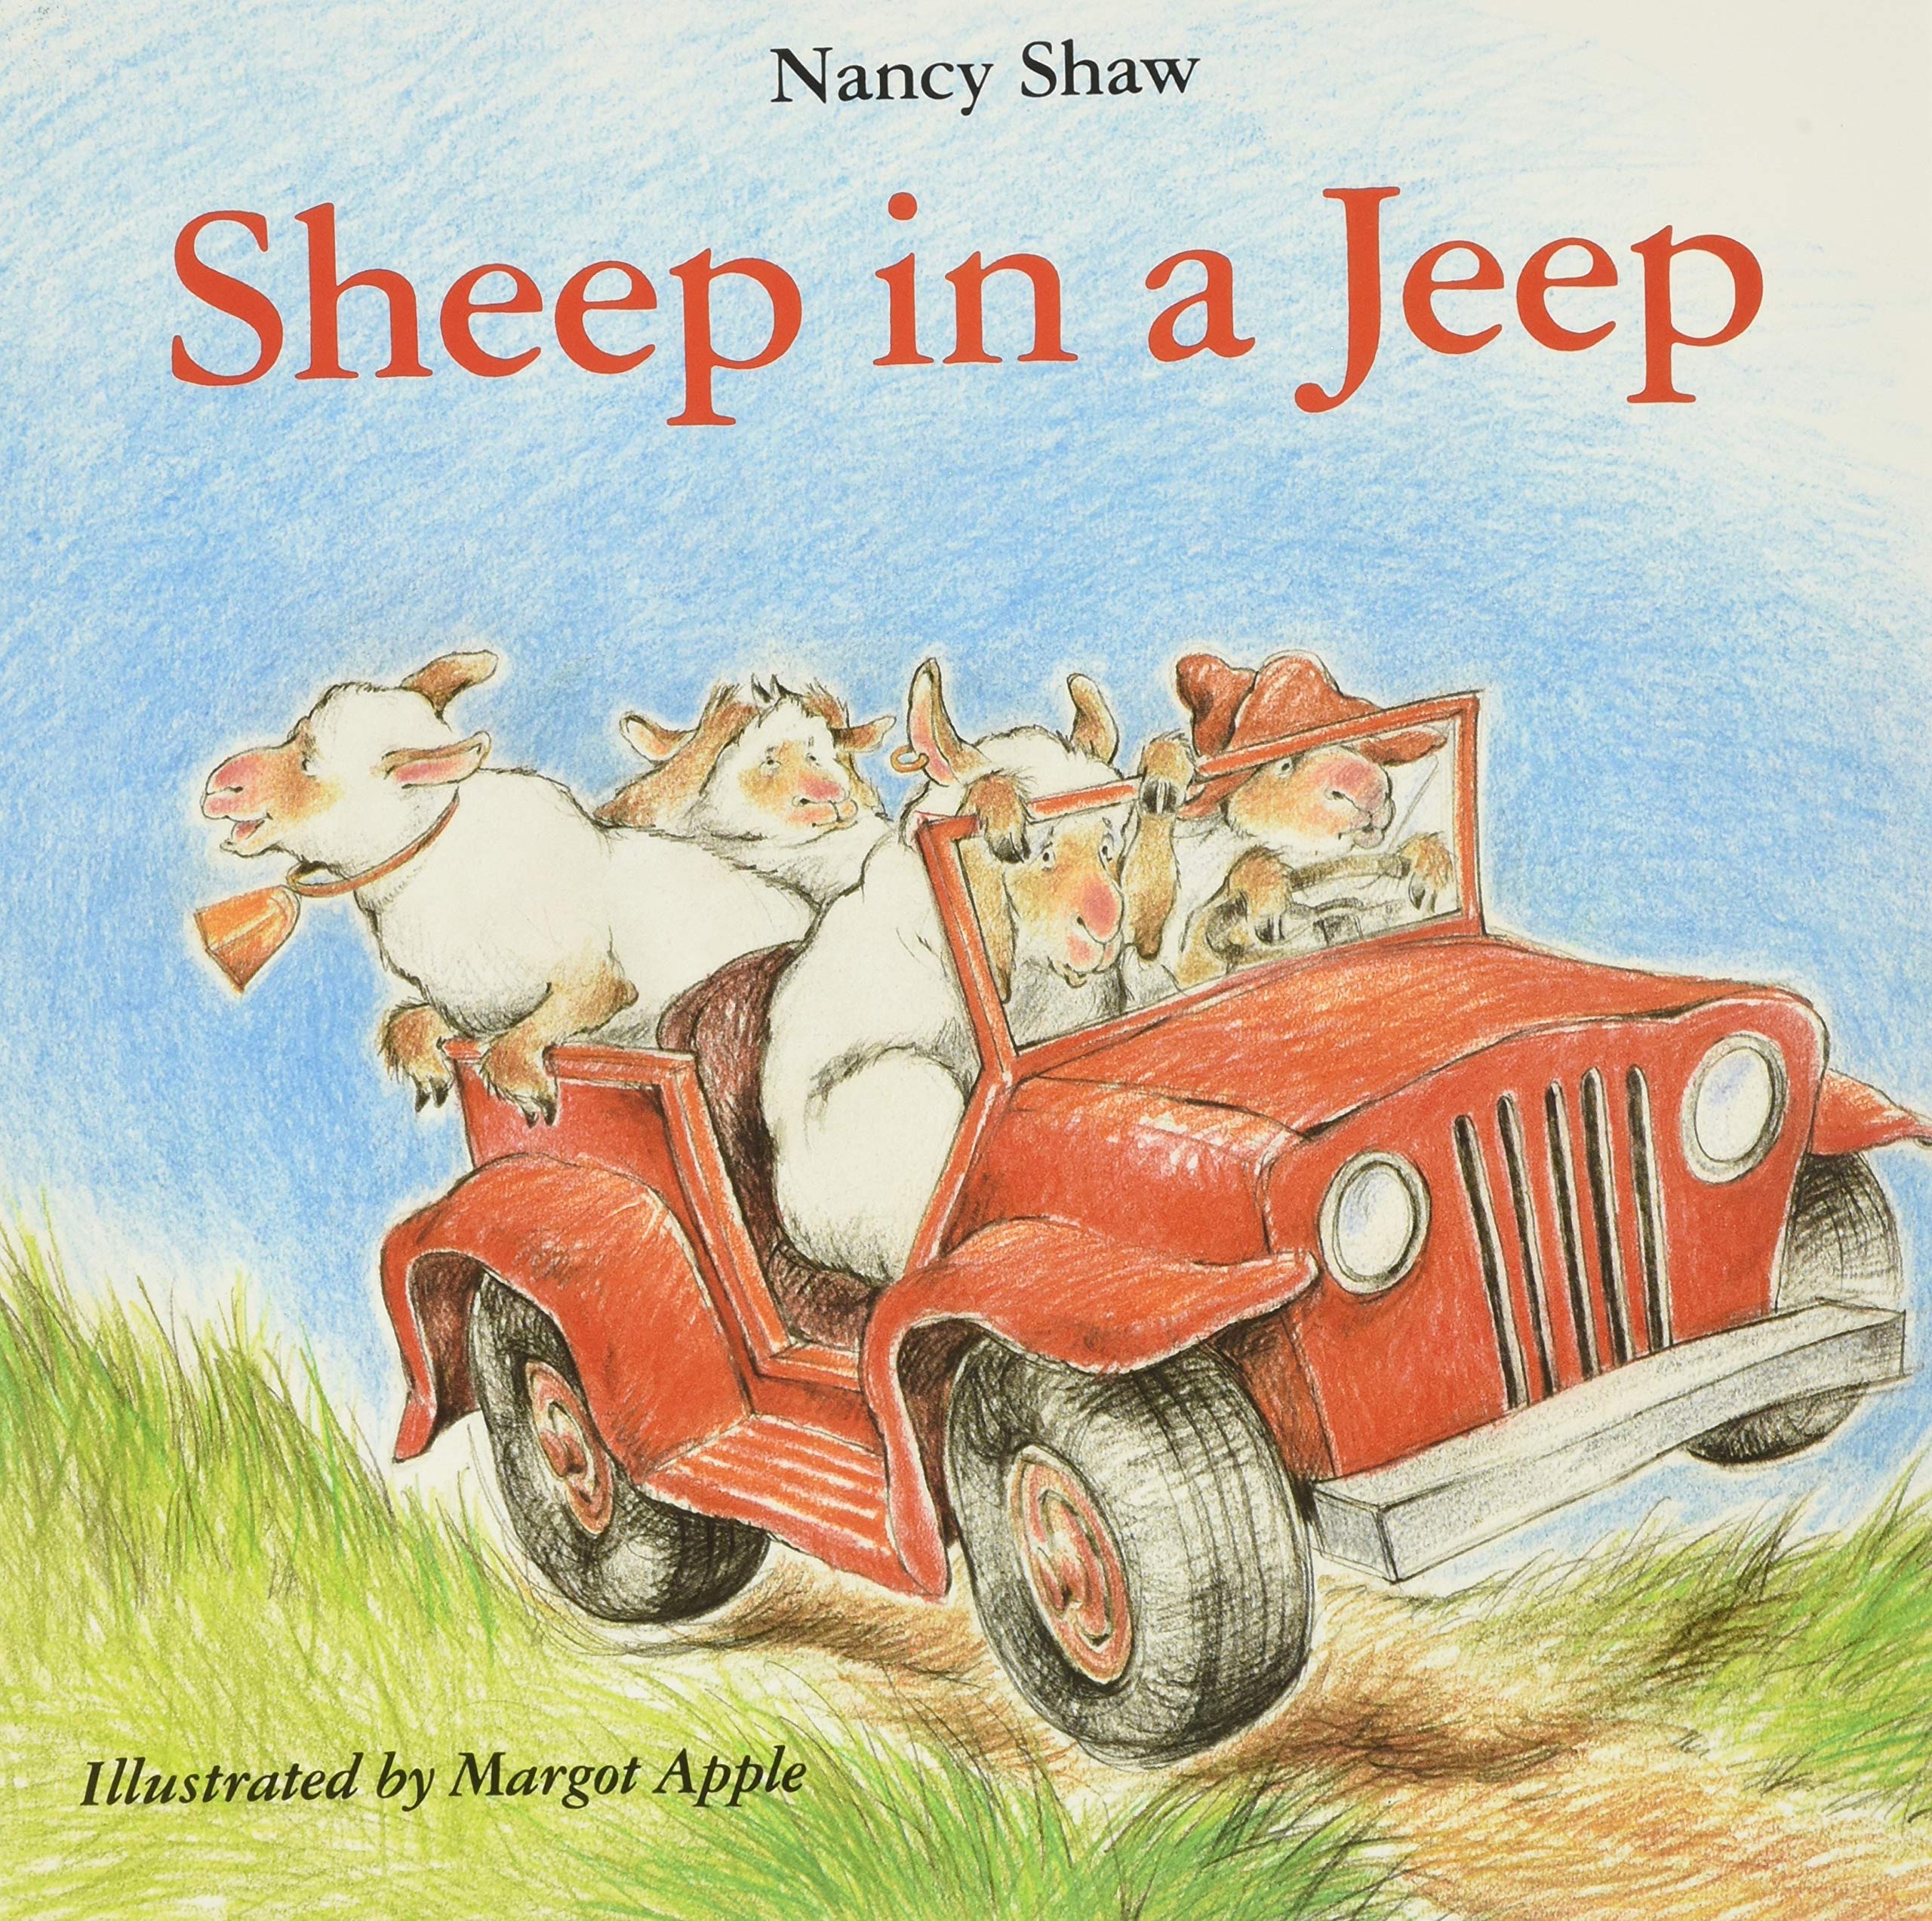 image for "Sheep in a jeep" 